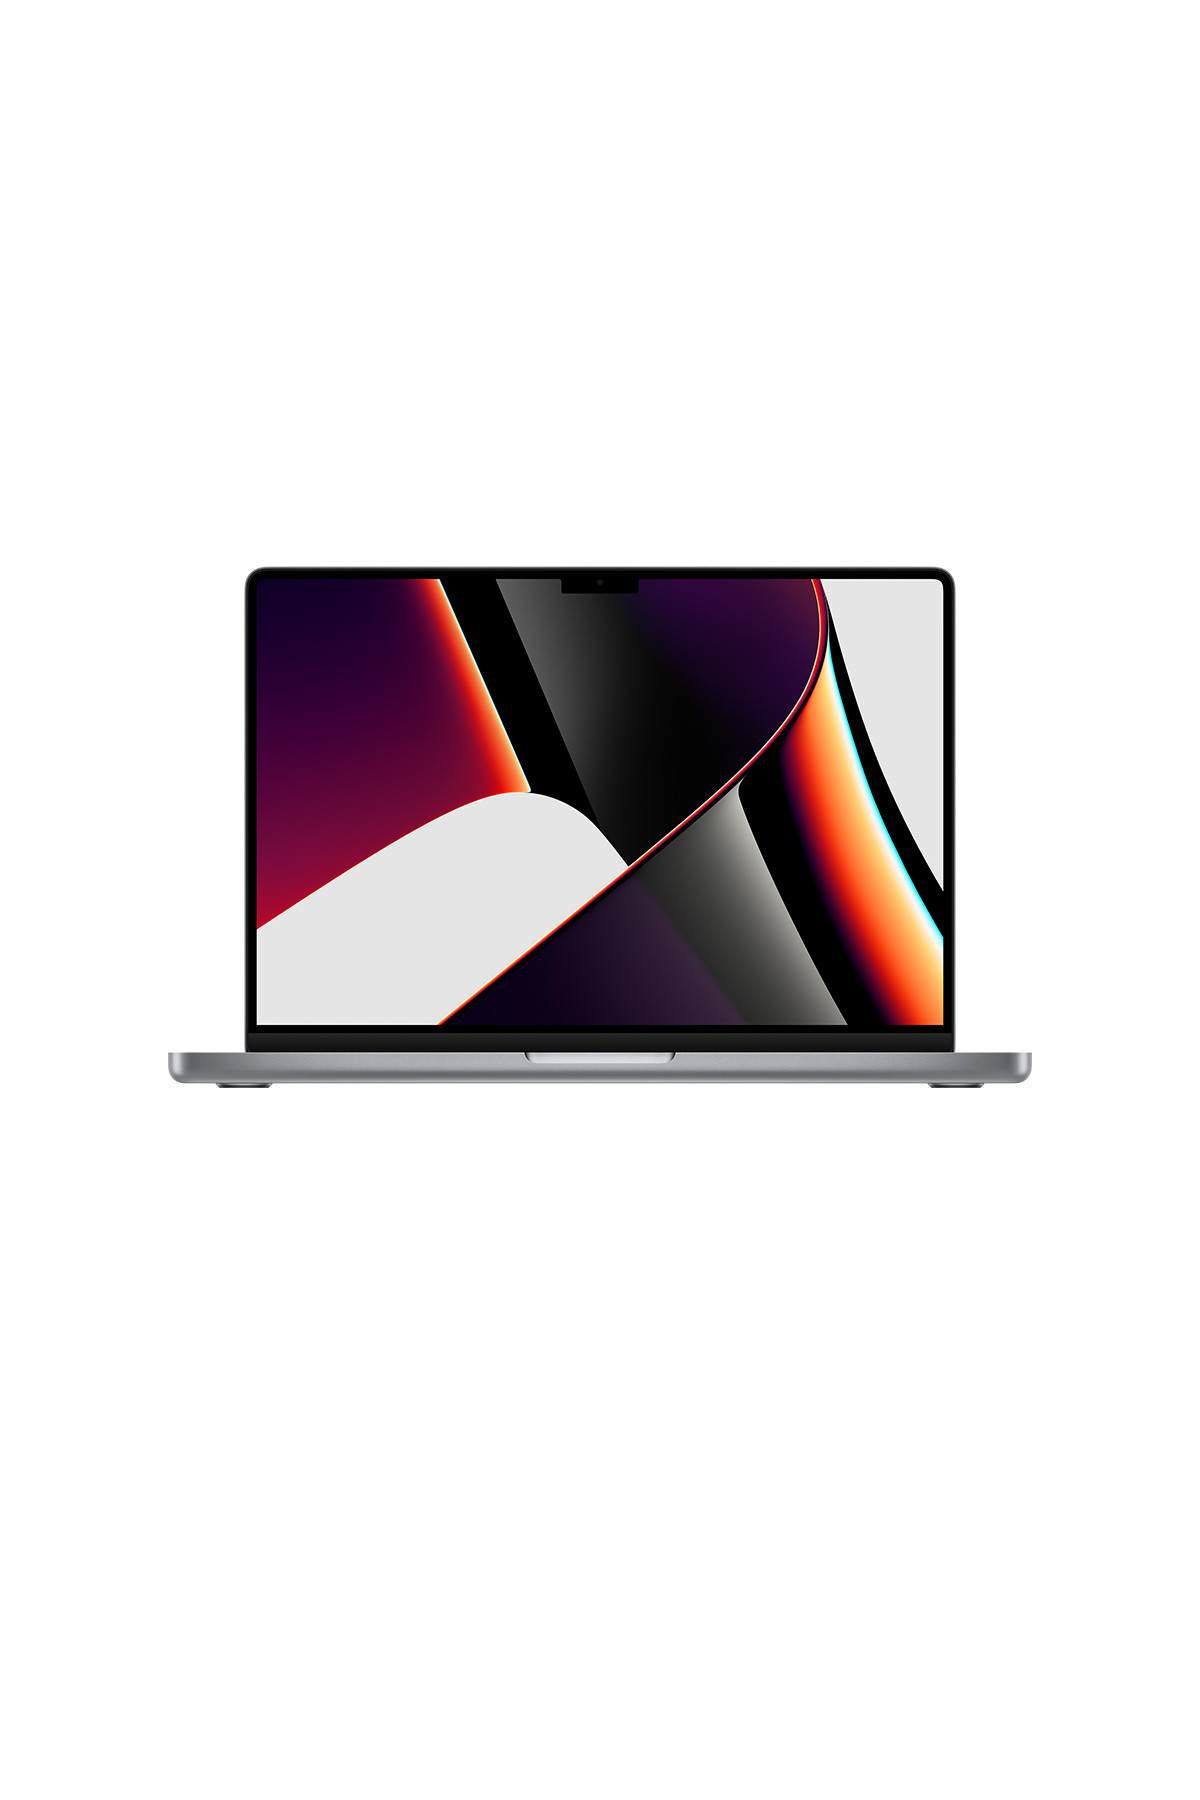 CTO Apple MacBook Pro 14-inch - Space Grey/M1 Max with 10C CPU, 24C GPU, 512GB SSD, 32GB unified memory, Keyboard: Backlit Magic Keyboard with Touch ID - US English, Mouse/Trackpad: Force Touch trackpad 96W USB-C Power Adapter 